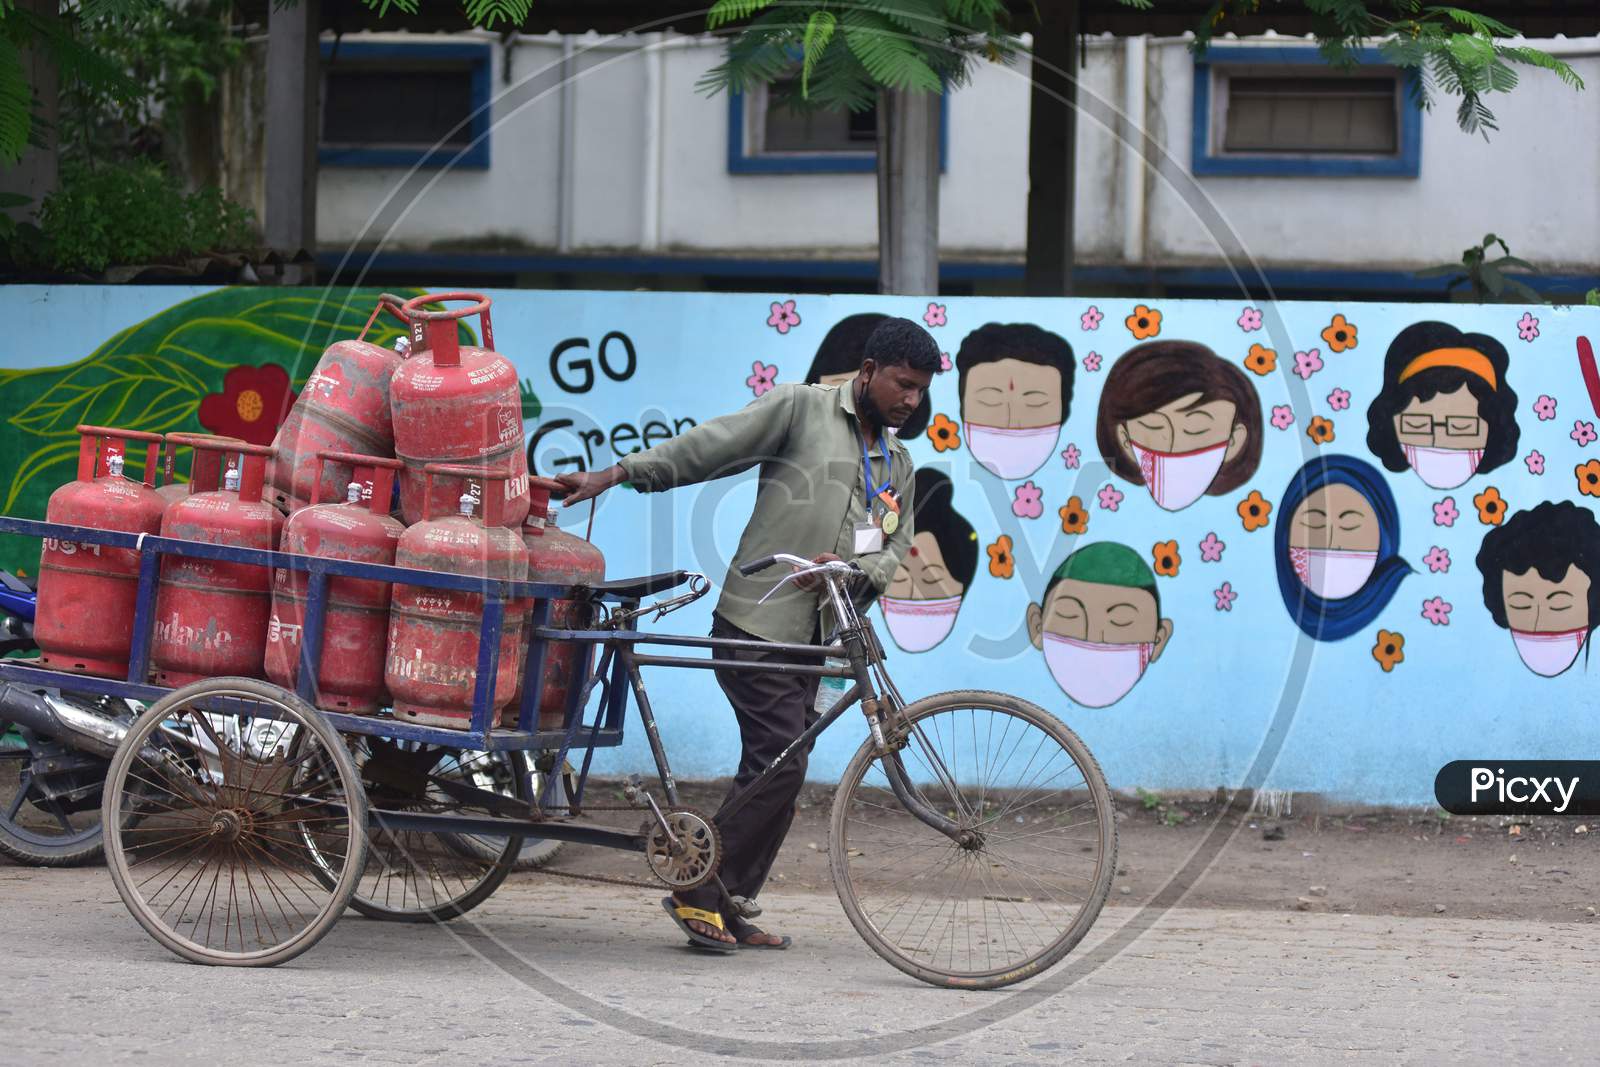 A Worker  Pushes  A Cart With Lpg Cylinders  In Front Of Wall Graffiti During Ongoing Covid19 Lockdown In Nagaon District In The Northeastern State Of Assam, India On June 9,2020